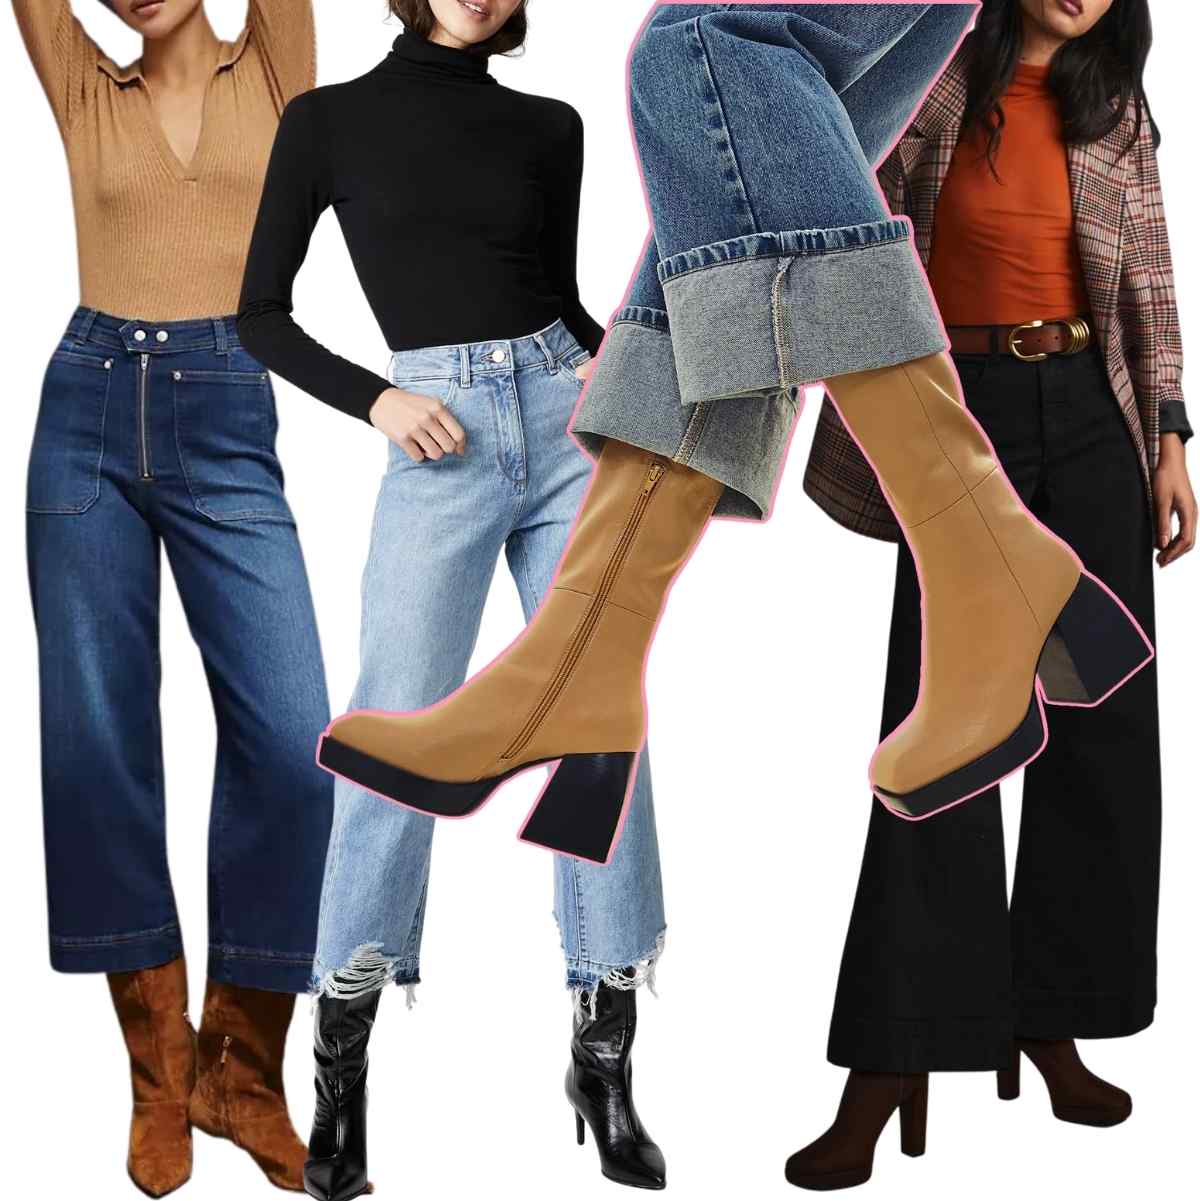 Collage of 4 women wearing wide leg jeans with knee high boots